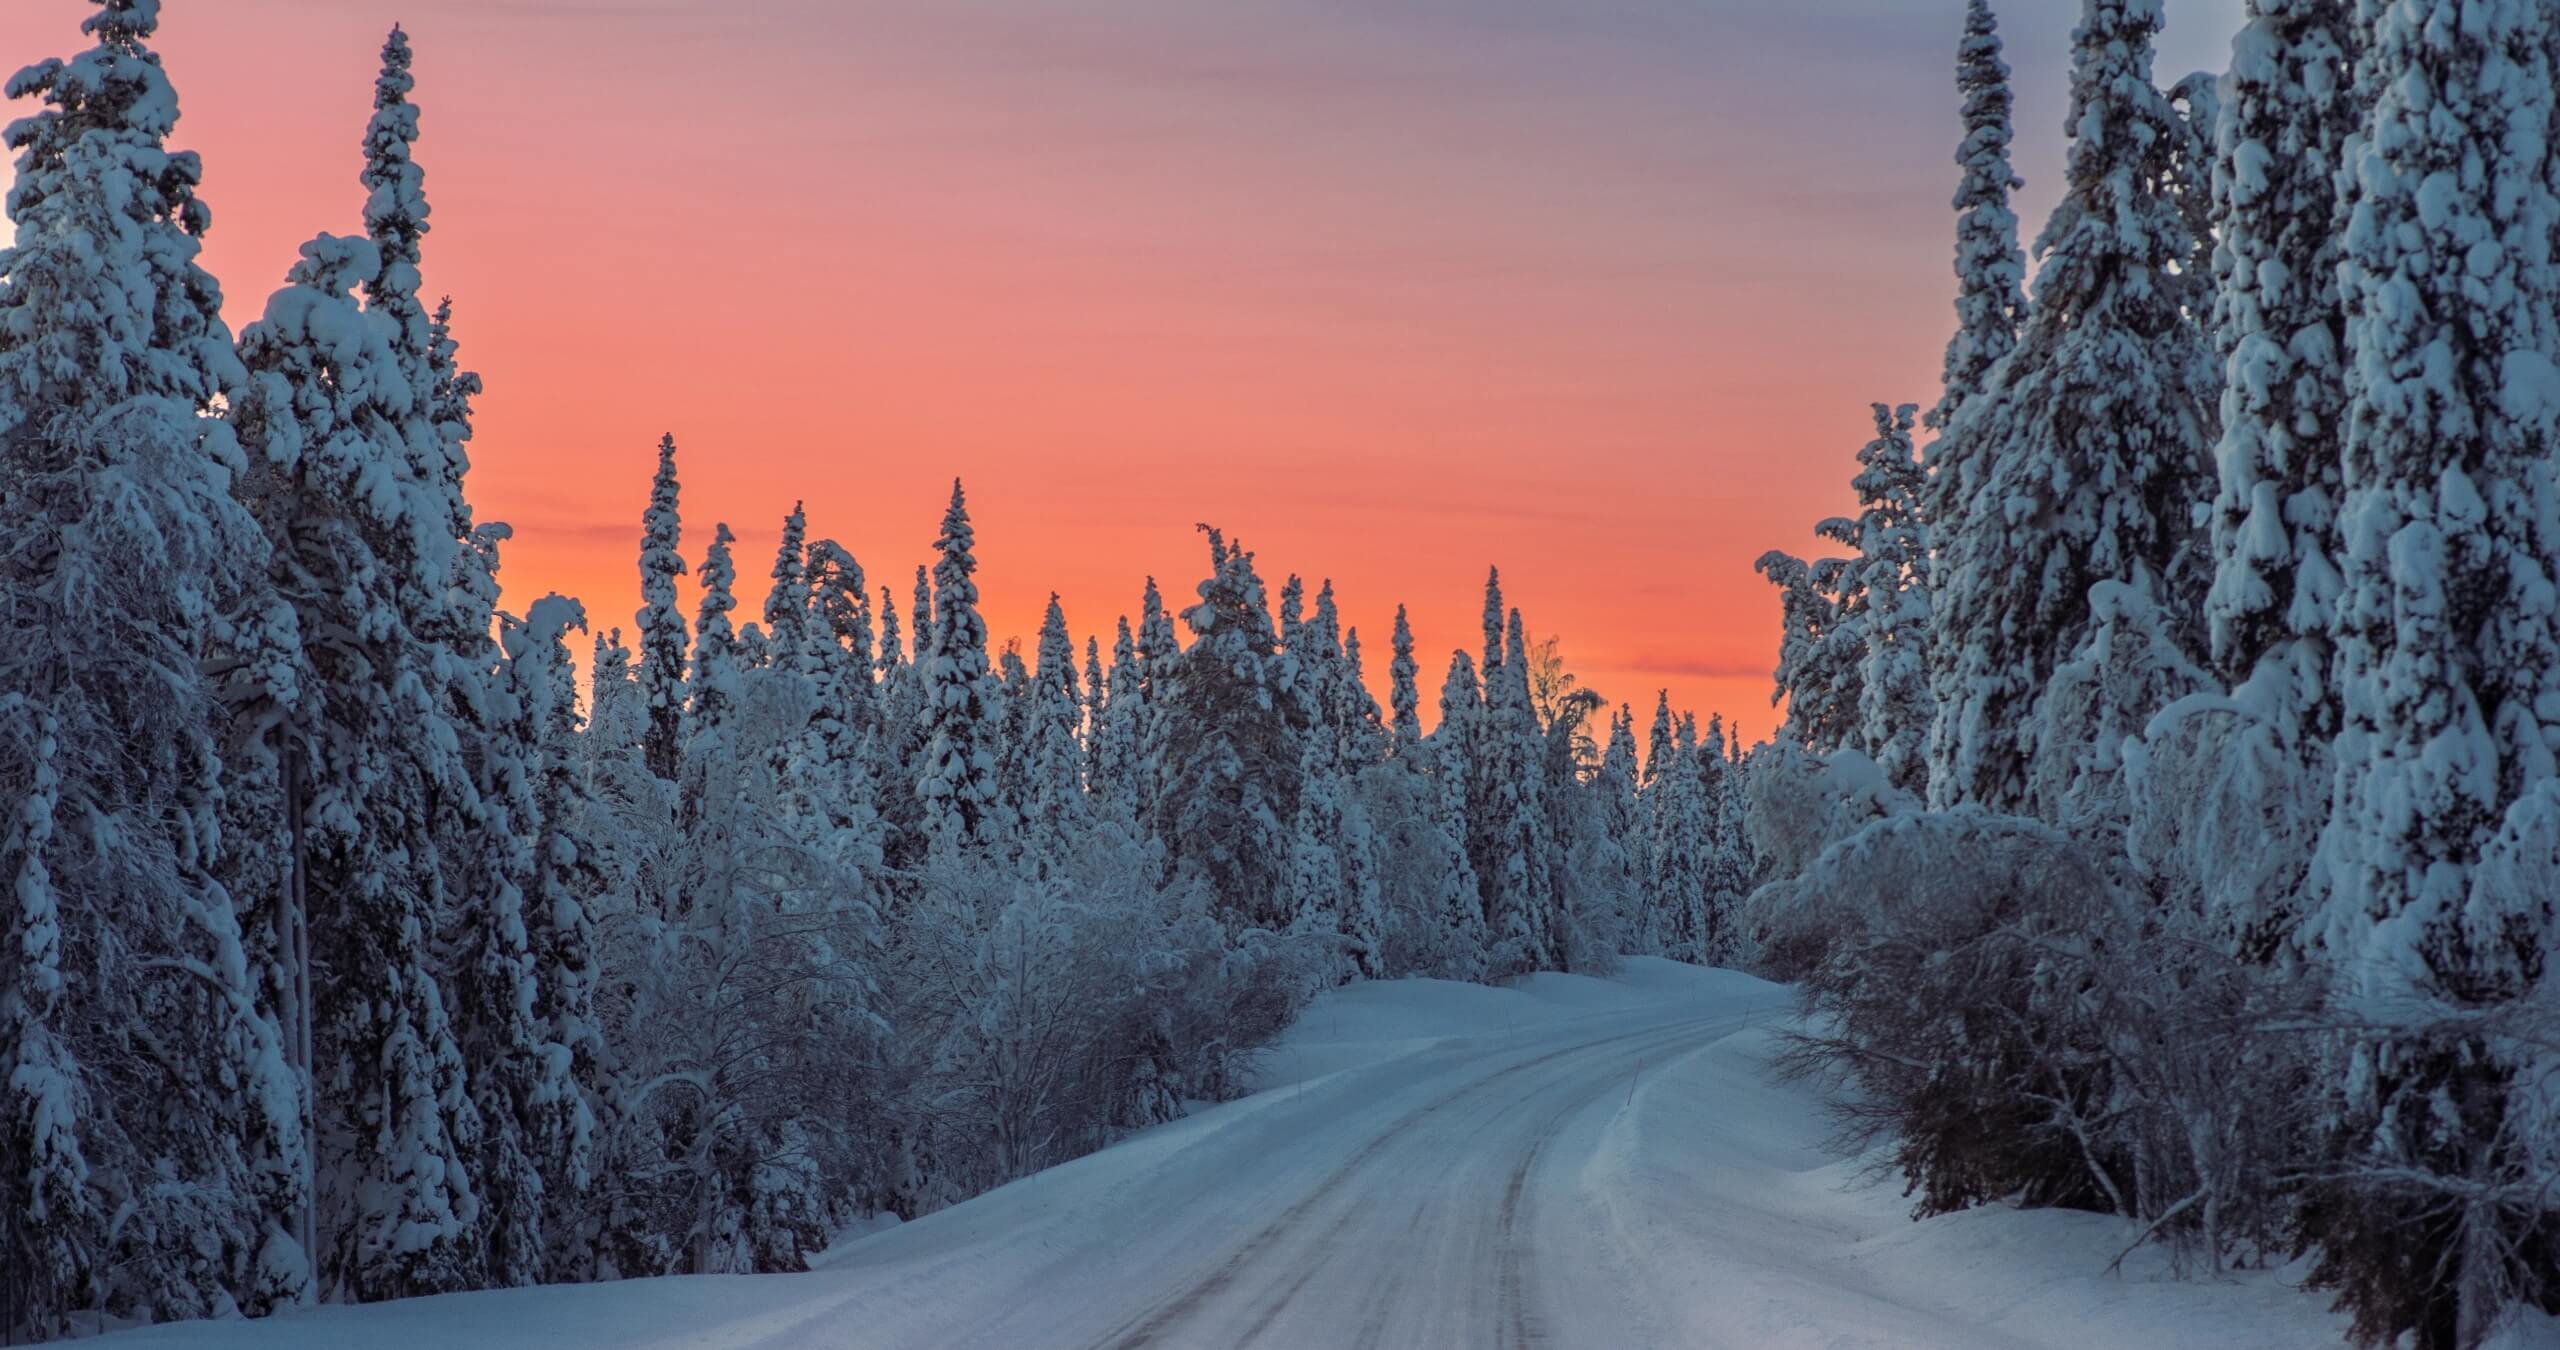 Paolo_Cirina_Arctic_Route101-View-of-Road-Finland@2x